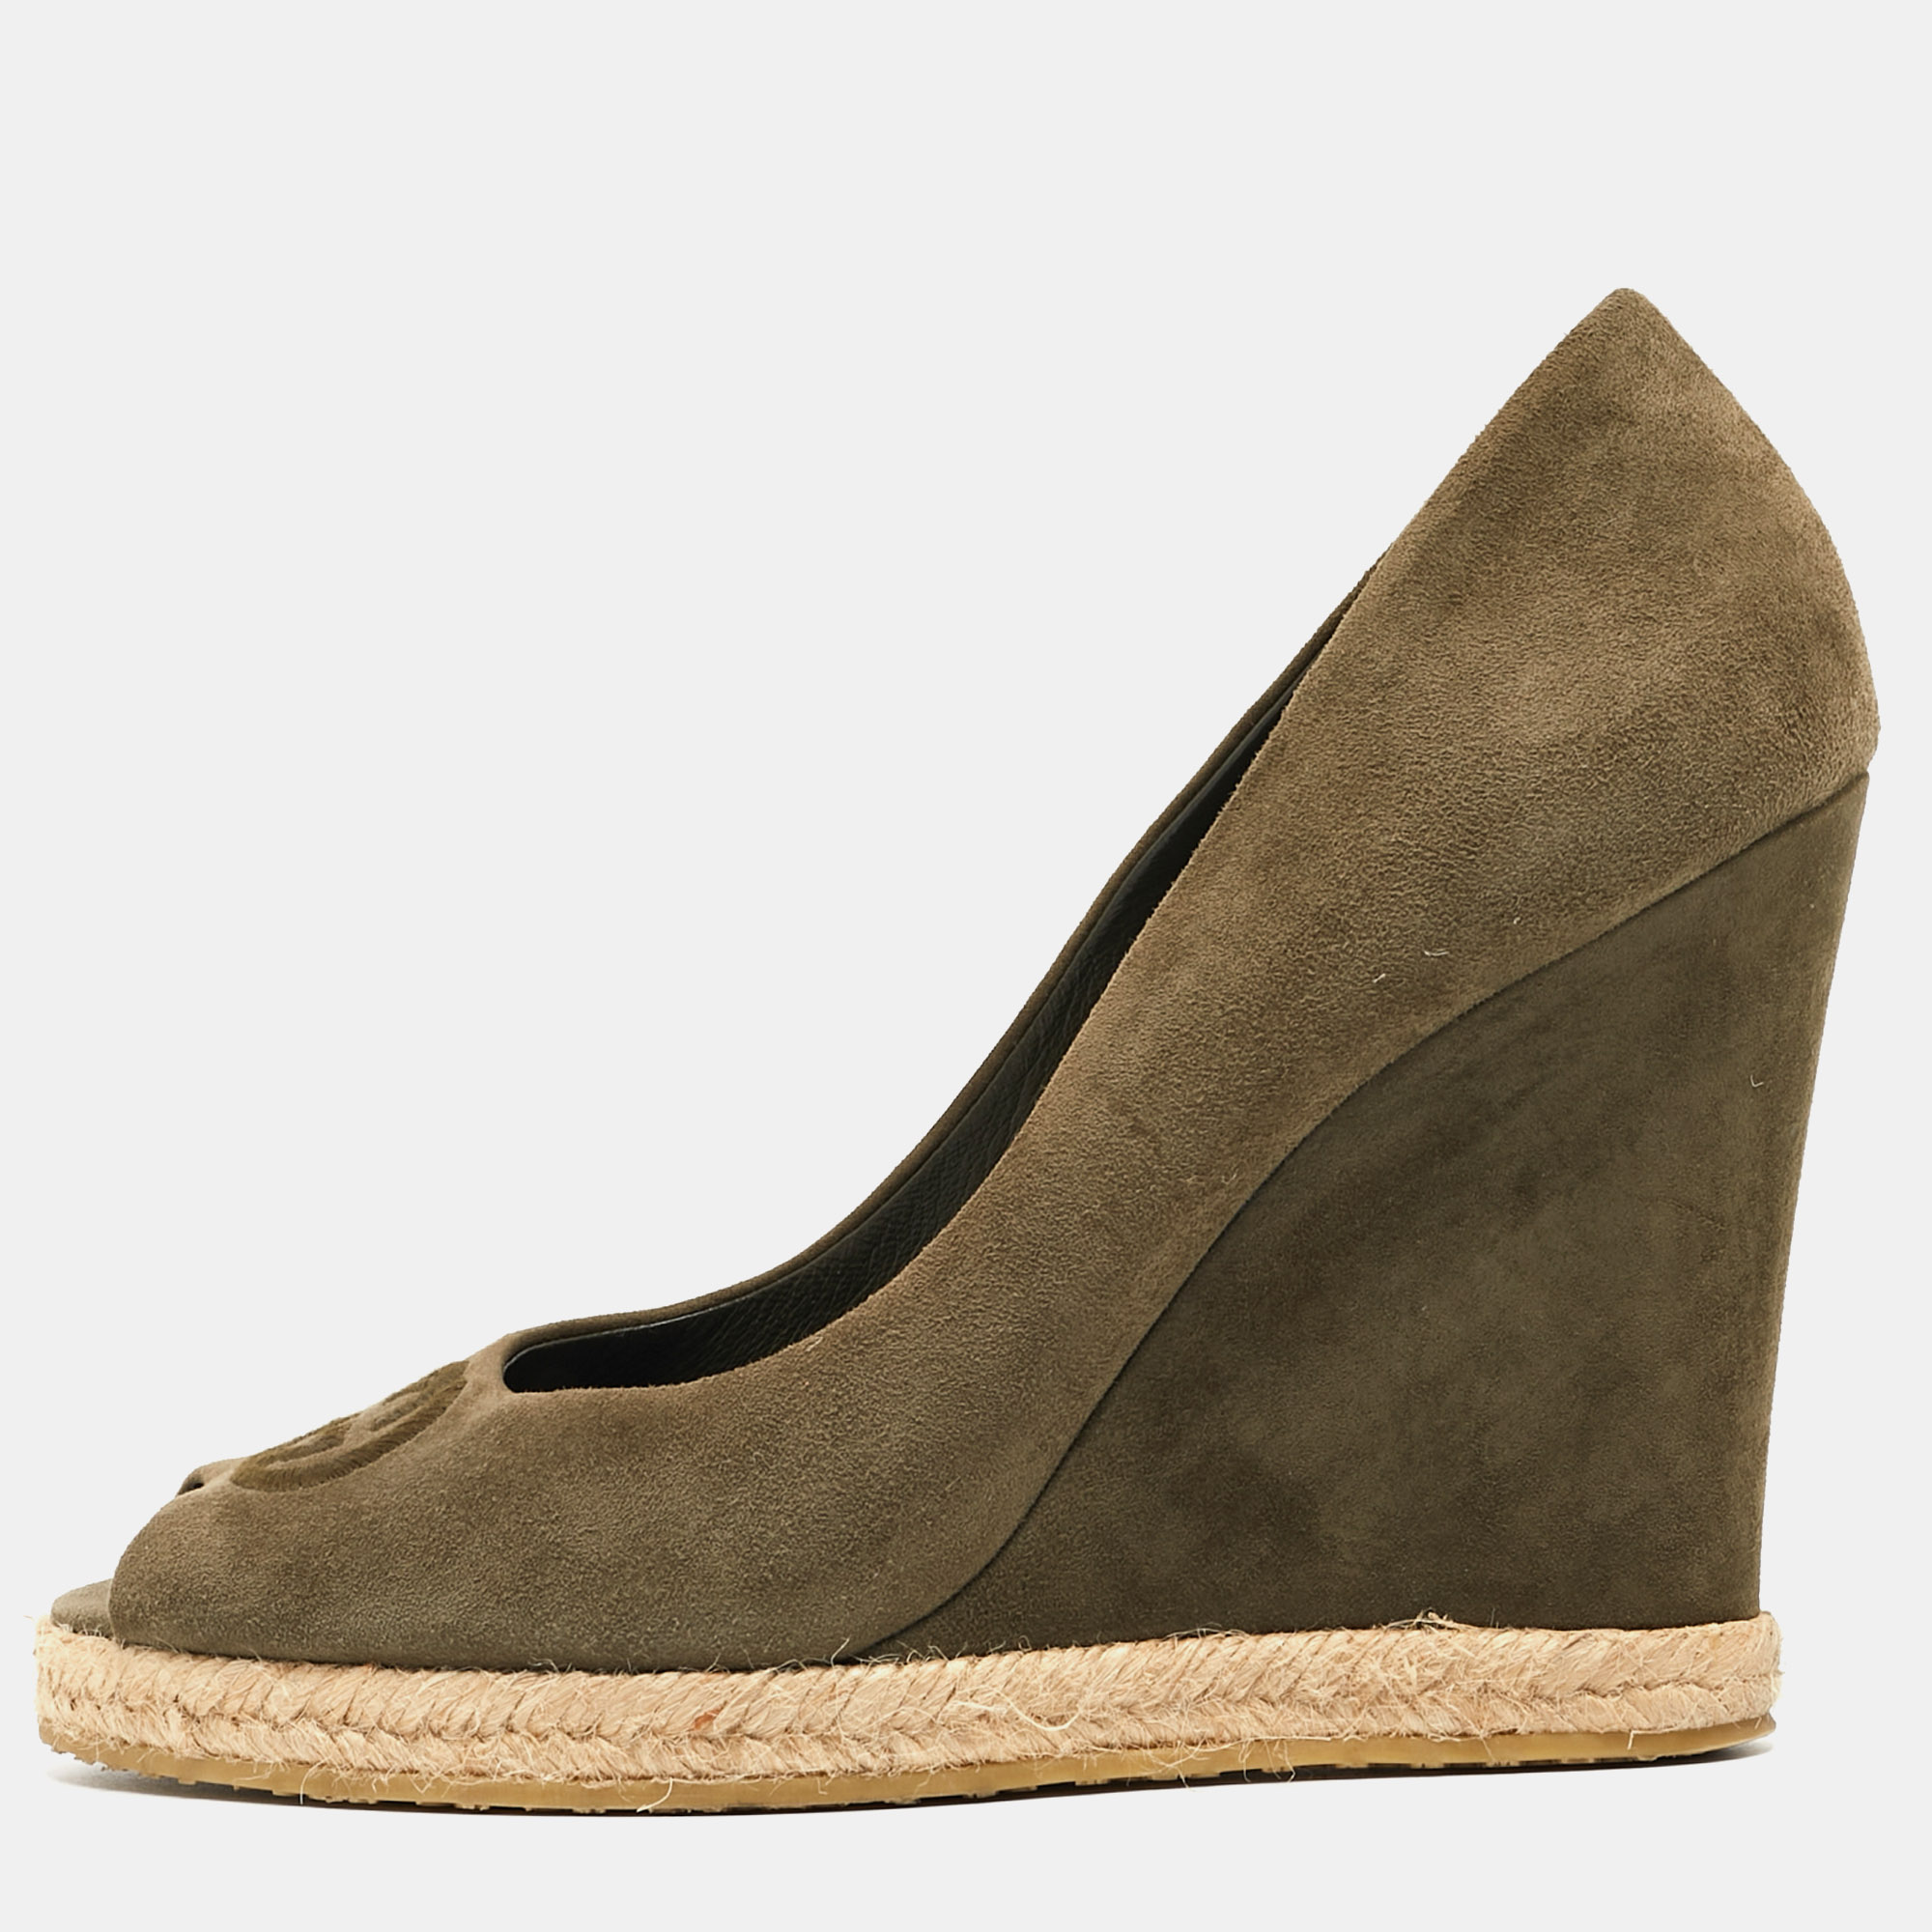 Gucci green suede peep toe wedge pumps size 40